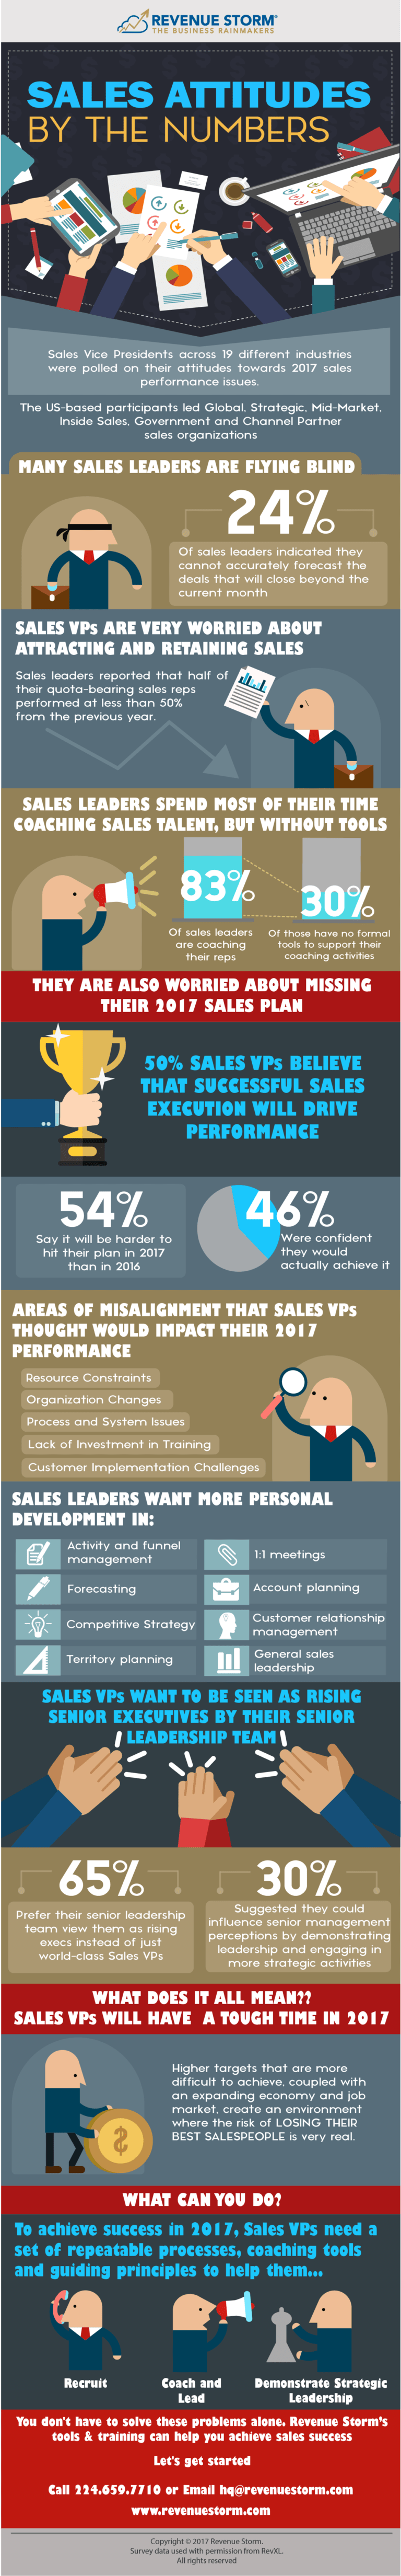 Sales Attitudes by the Numbers Infographic - Revenue Storm